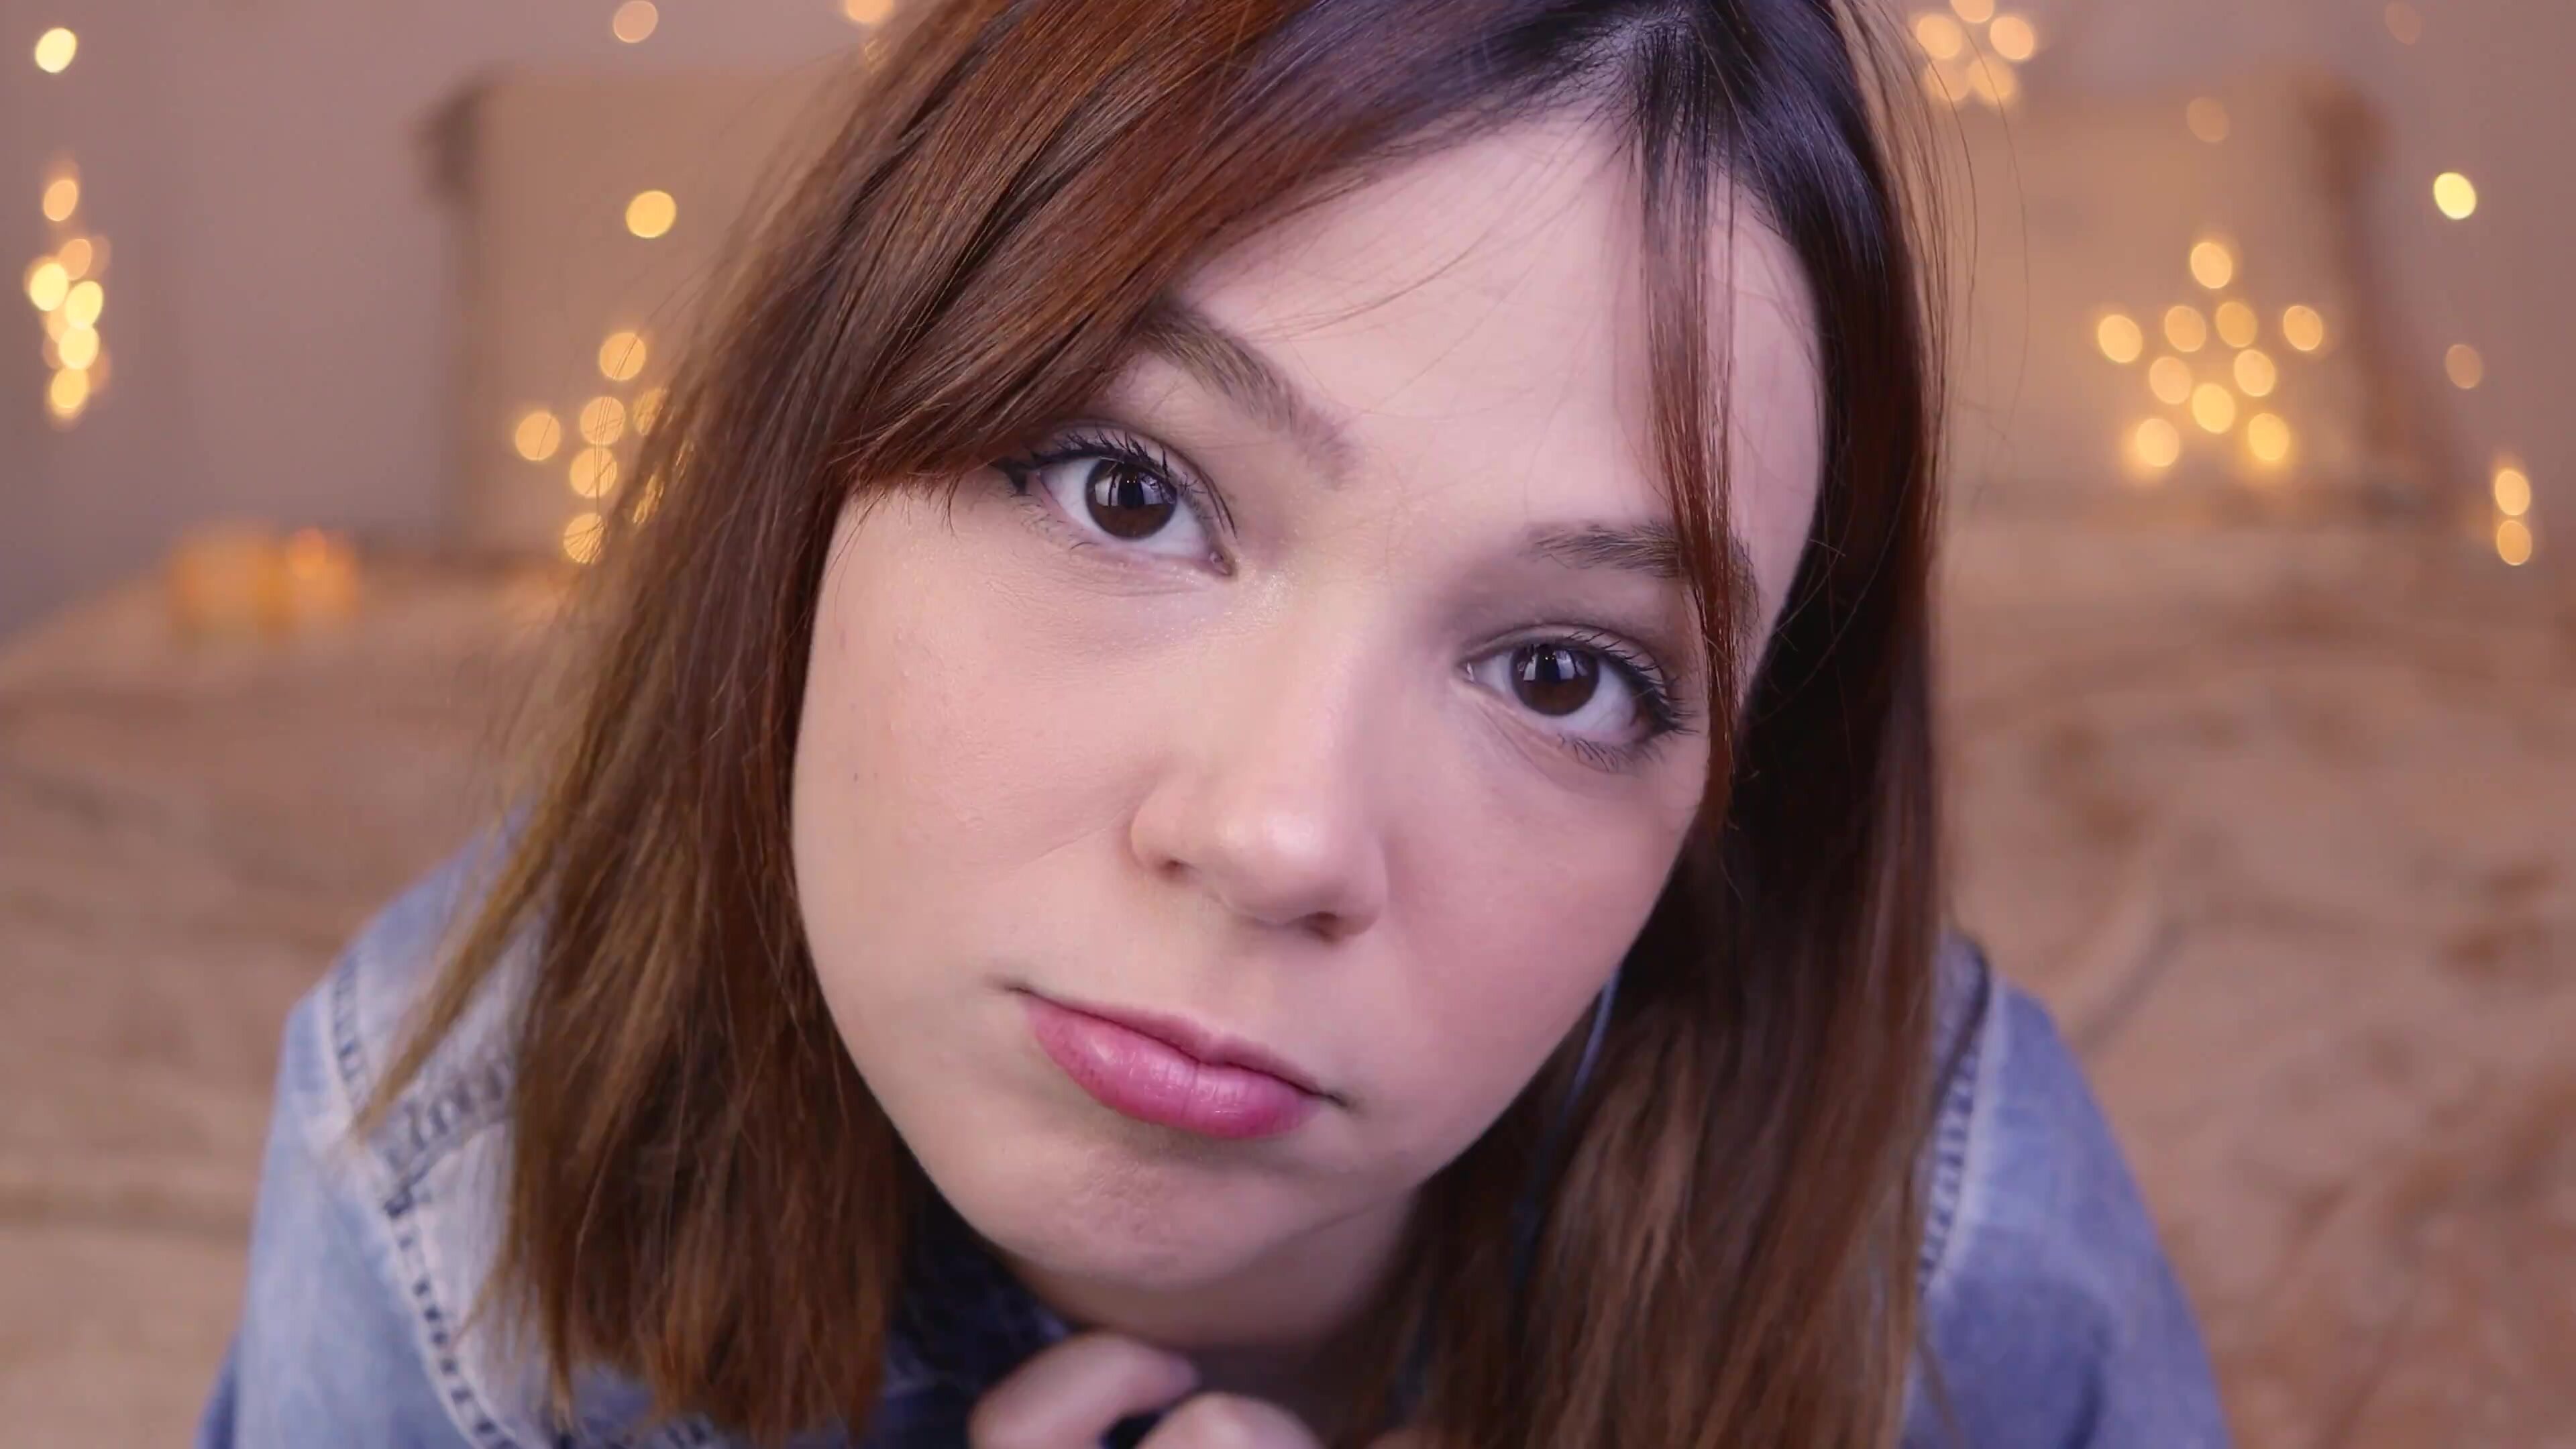 maimy asmr need girlfriend wants your attention tonight